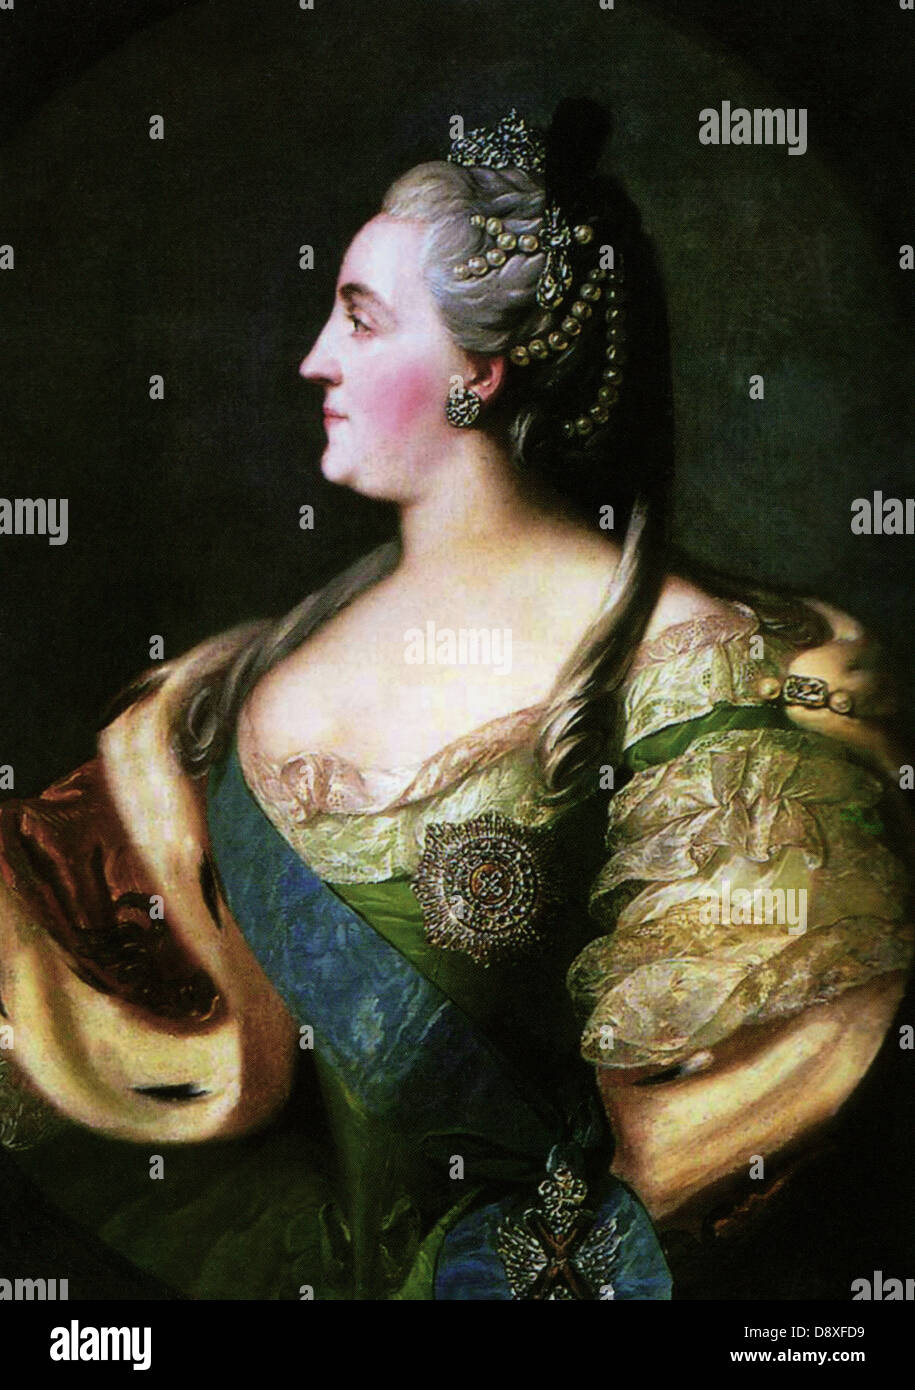 Catherine the Great, Empress of Russia (1729 - 1796) - Editorial use only. Stock Photo